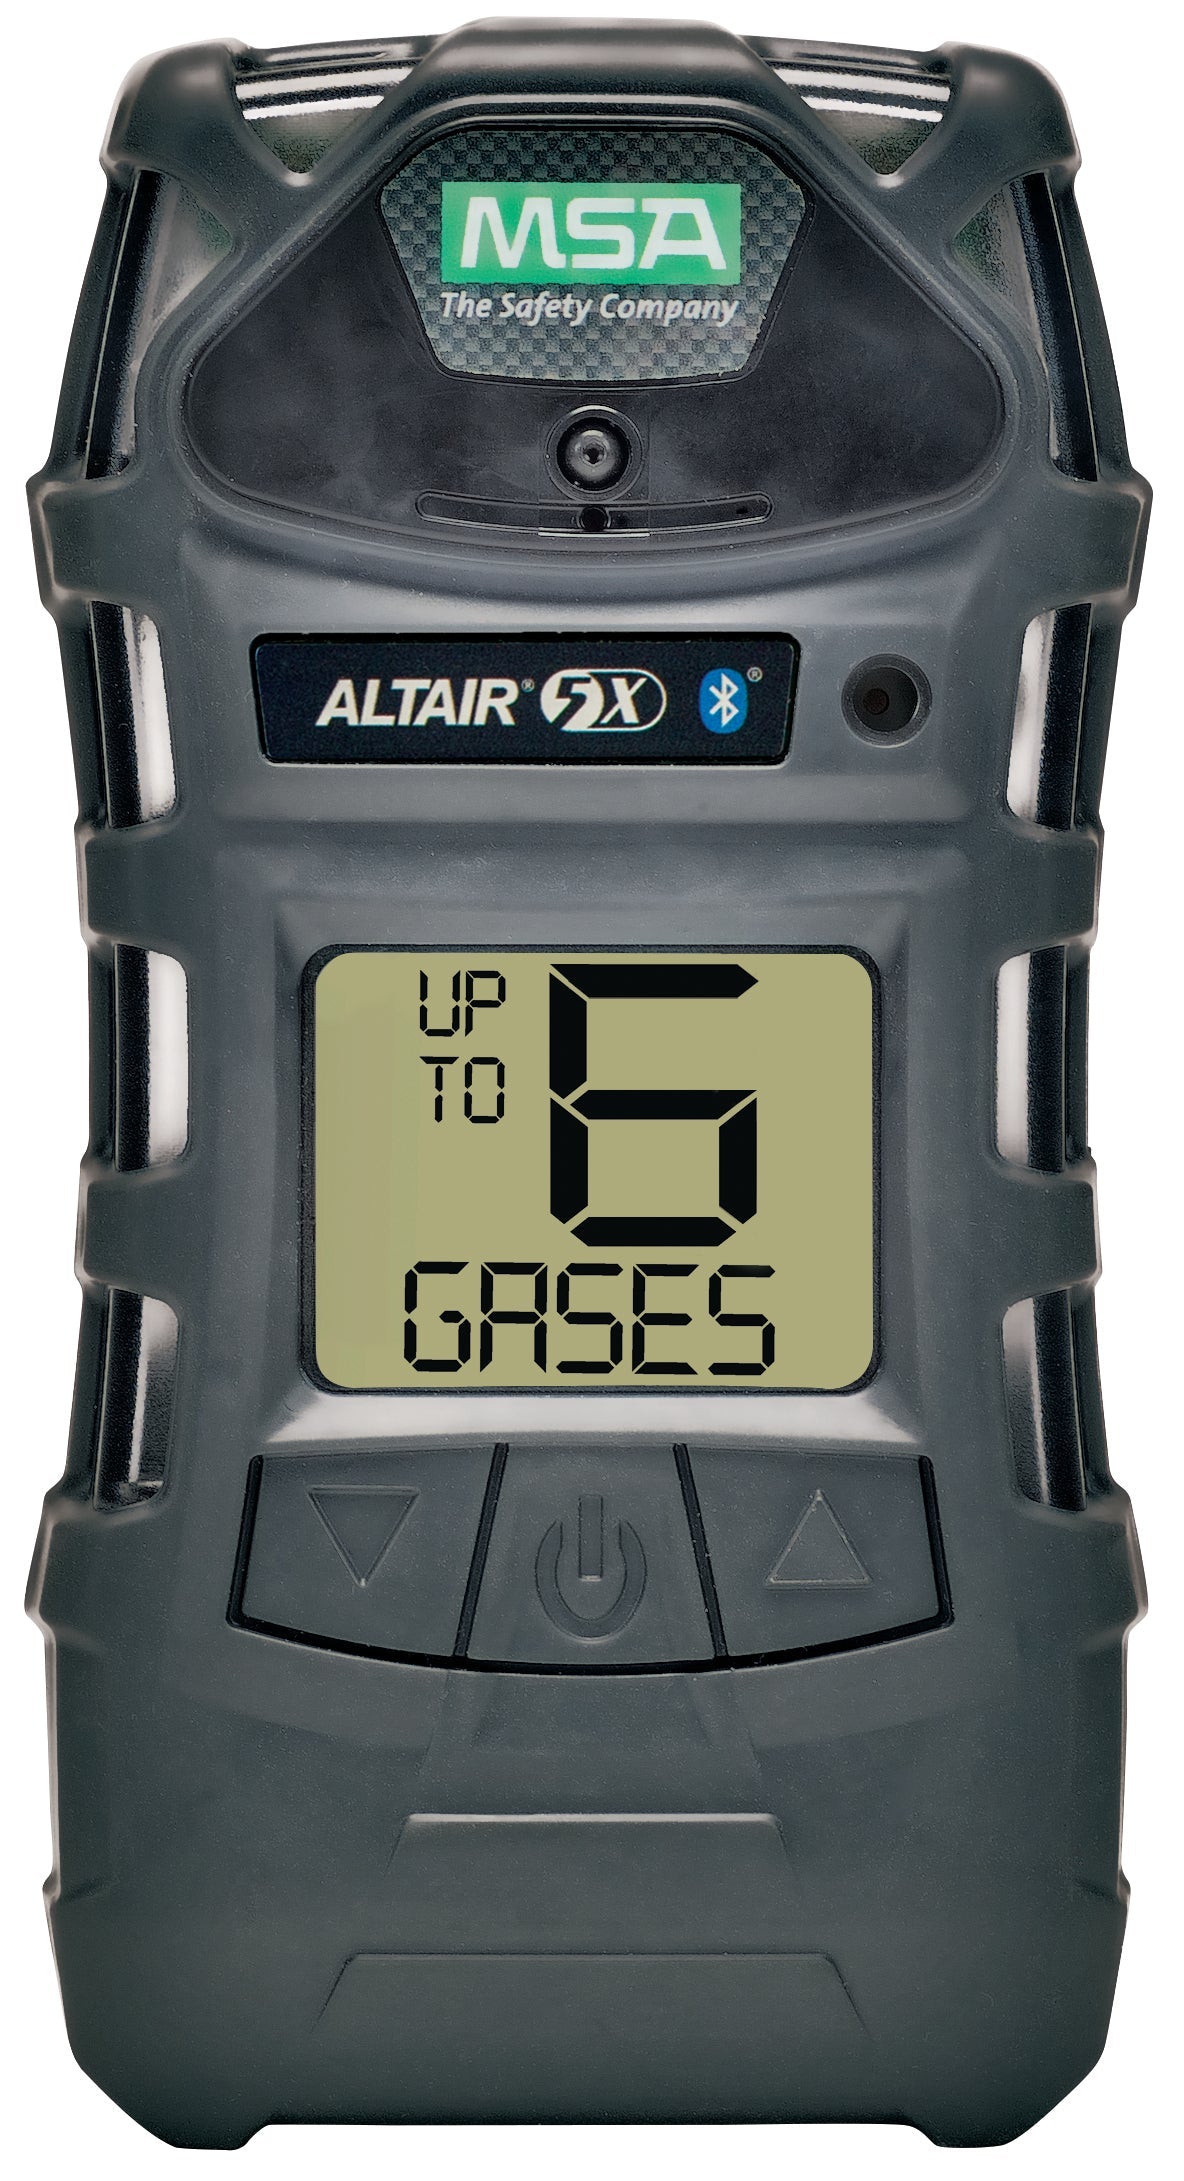 MSA Altair 5X Multigas Detector with Built-in Pump - LEL/O2/CO/H2S - Rental